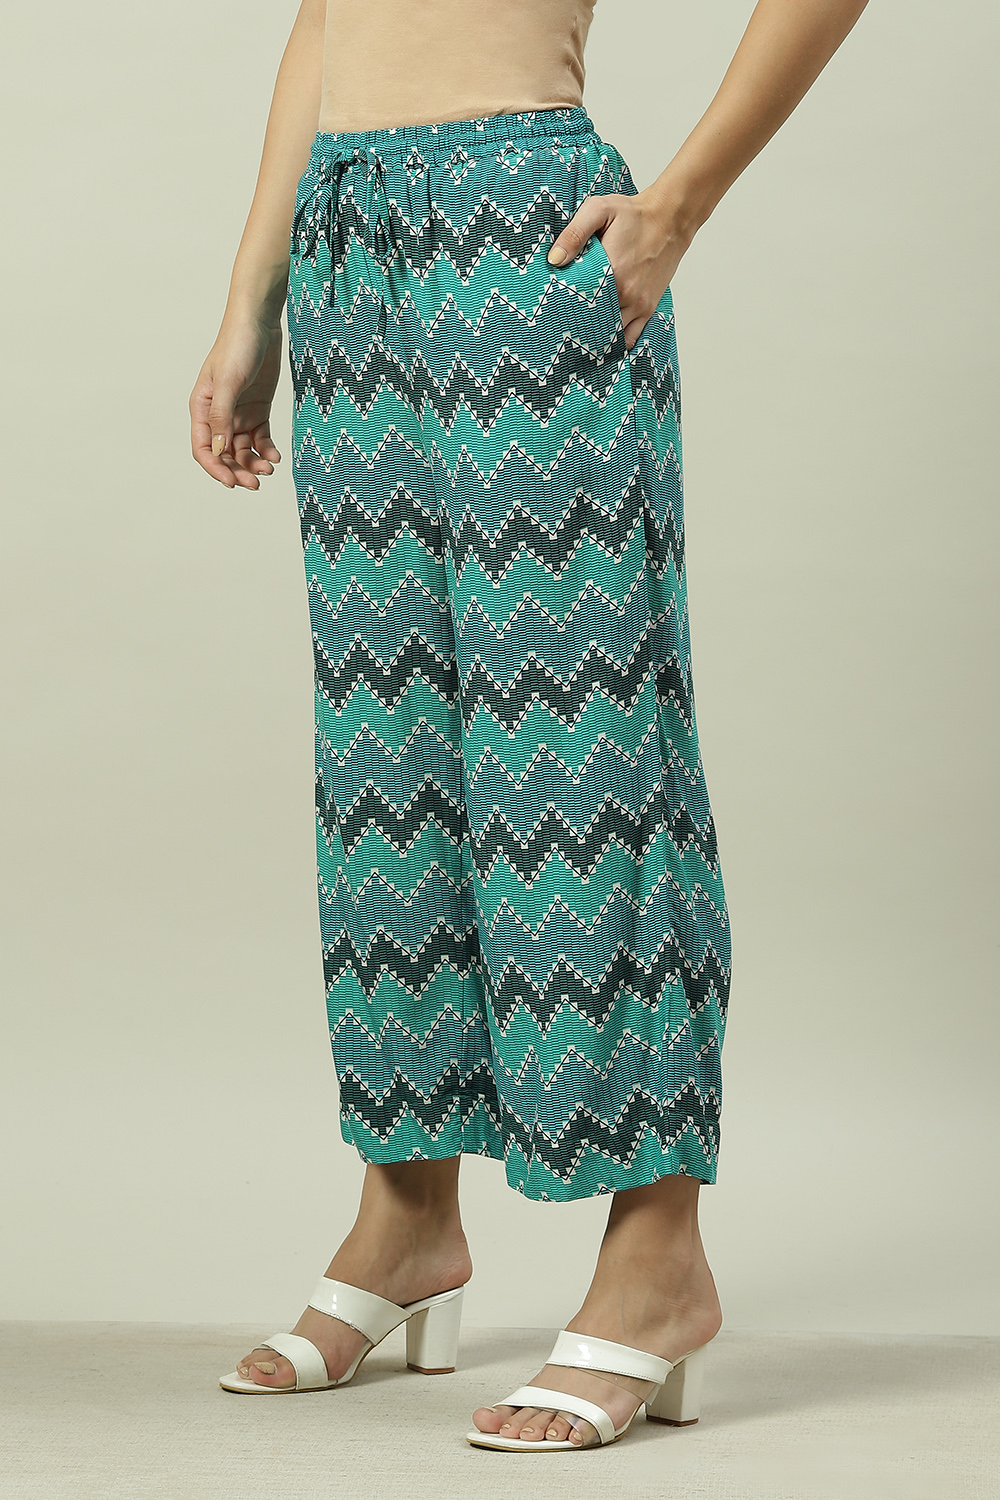 Buy Turquoise LIVA Pants () for INR649.50